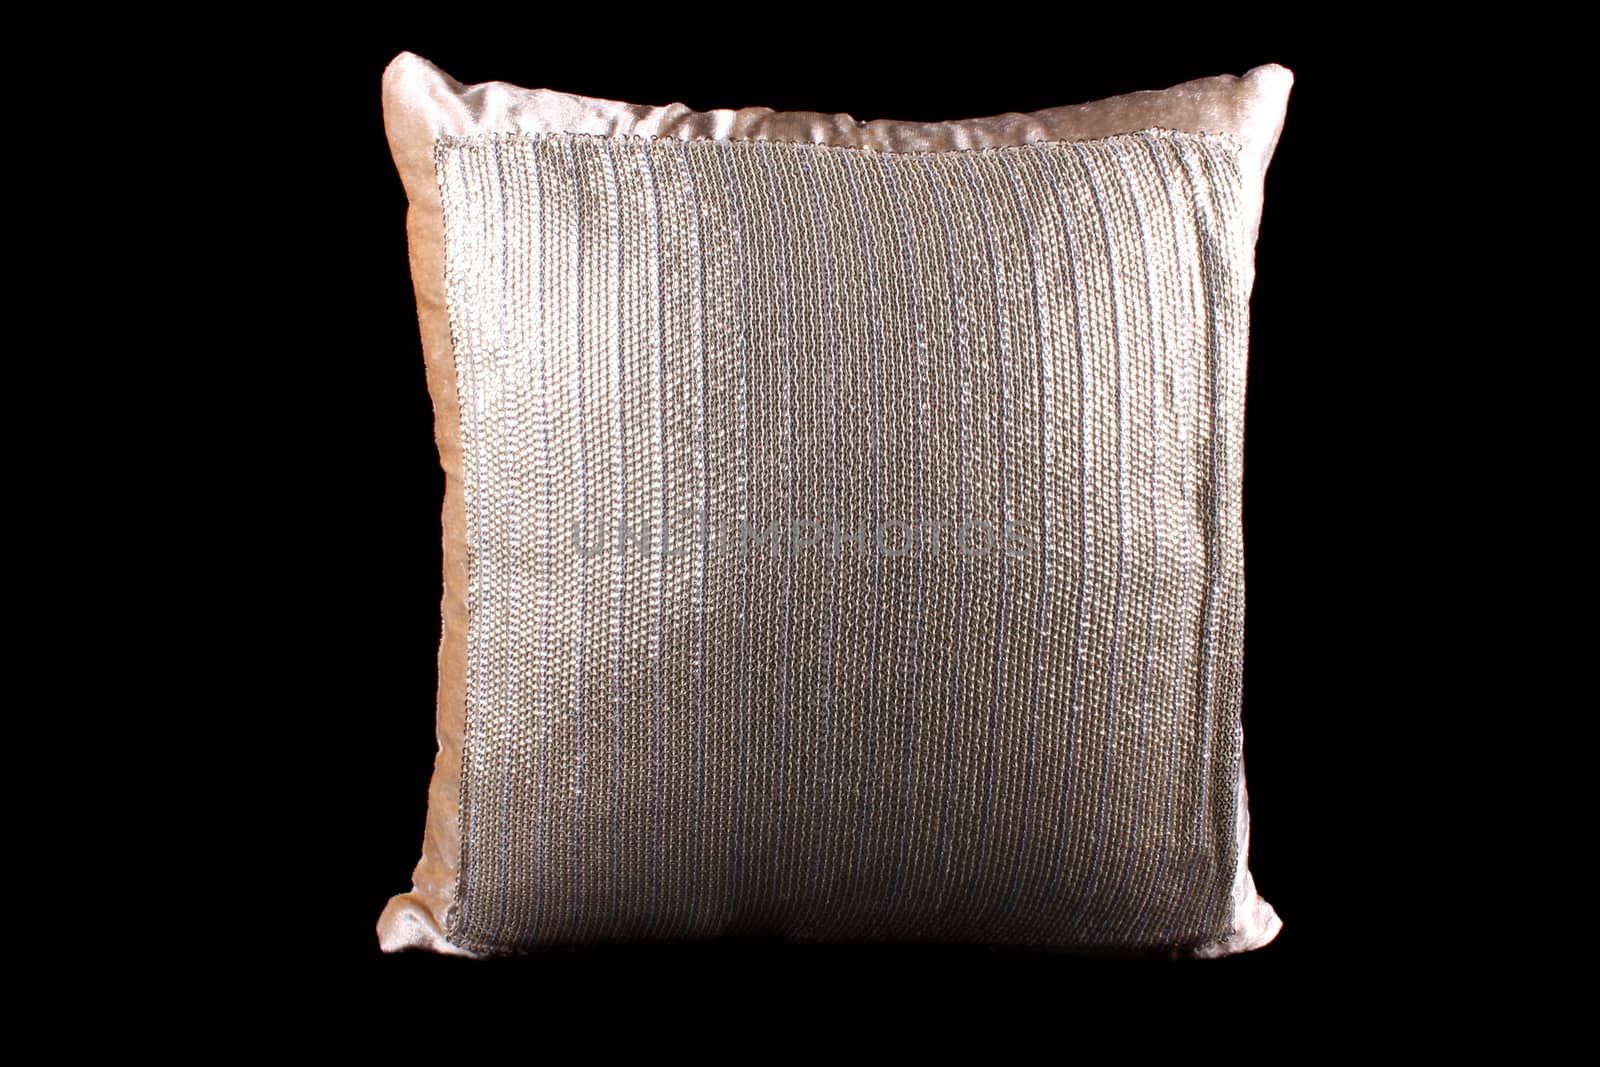 A golden and silver colored shiny pillow with sequins on black studio background.